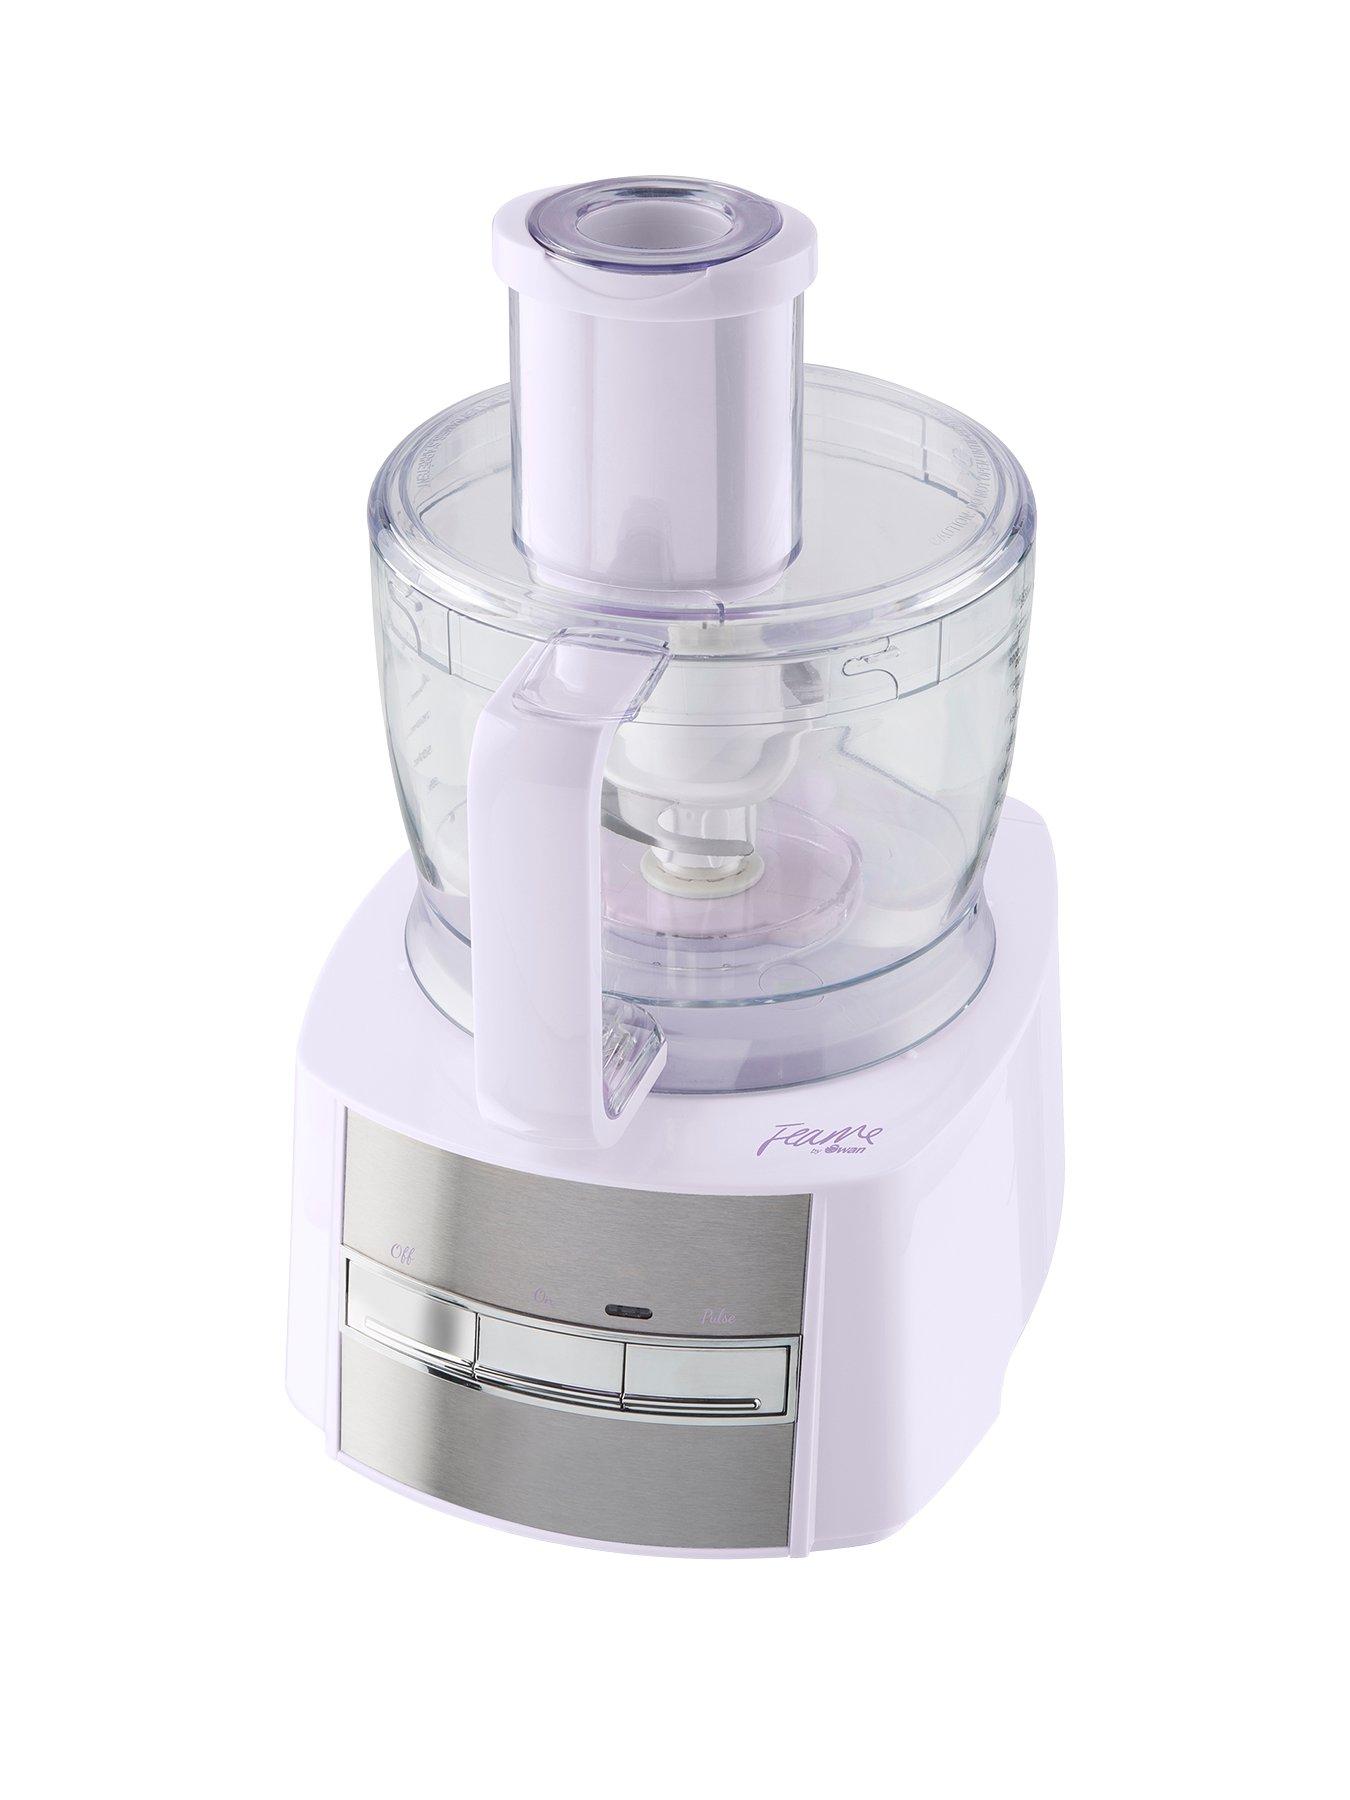 Swan Fearne By Swan Food Processor Lily Review thumbnail